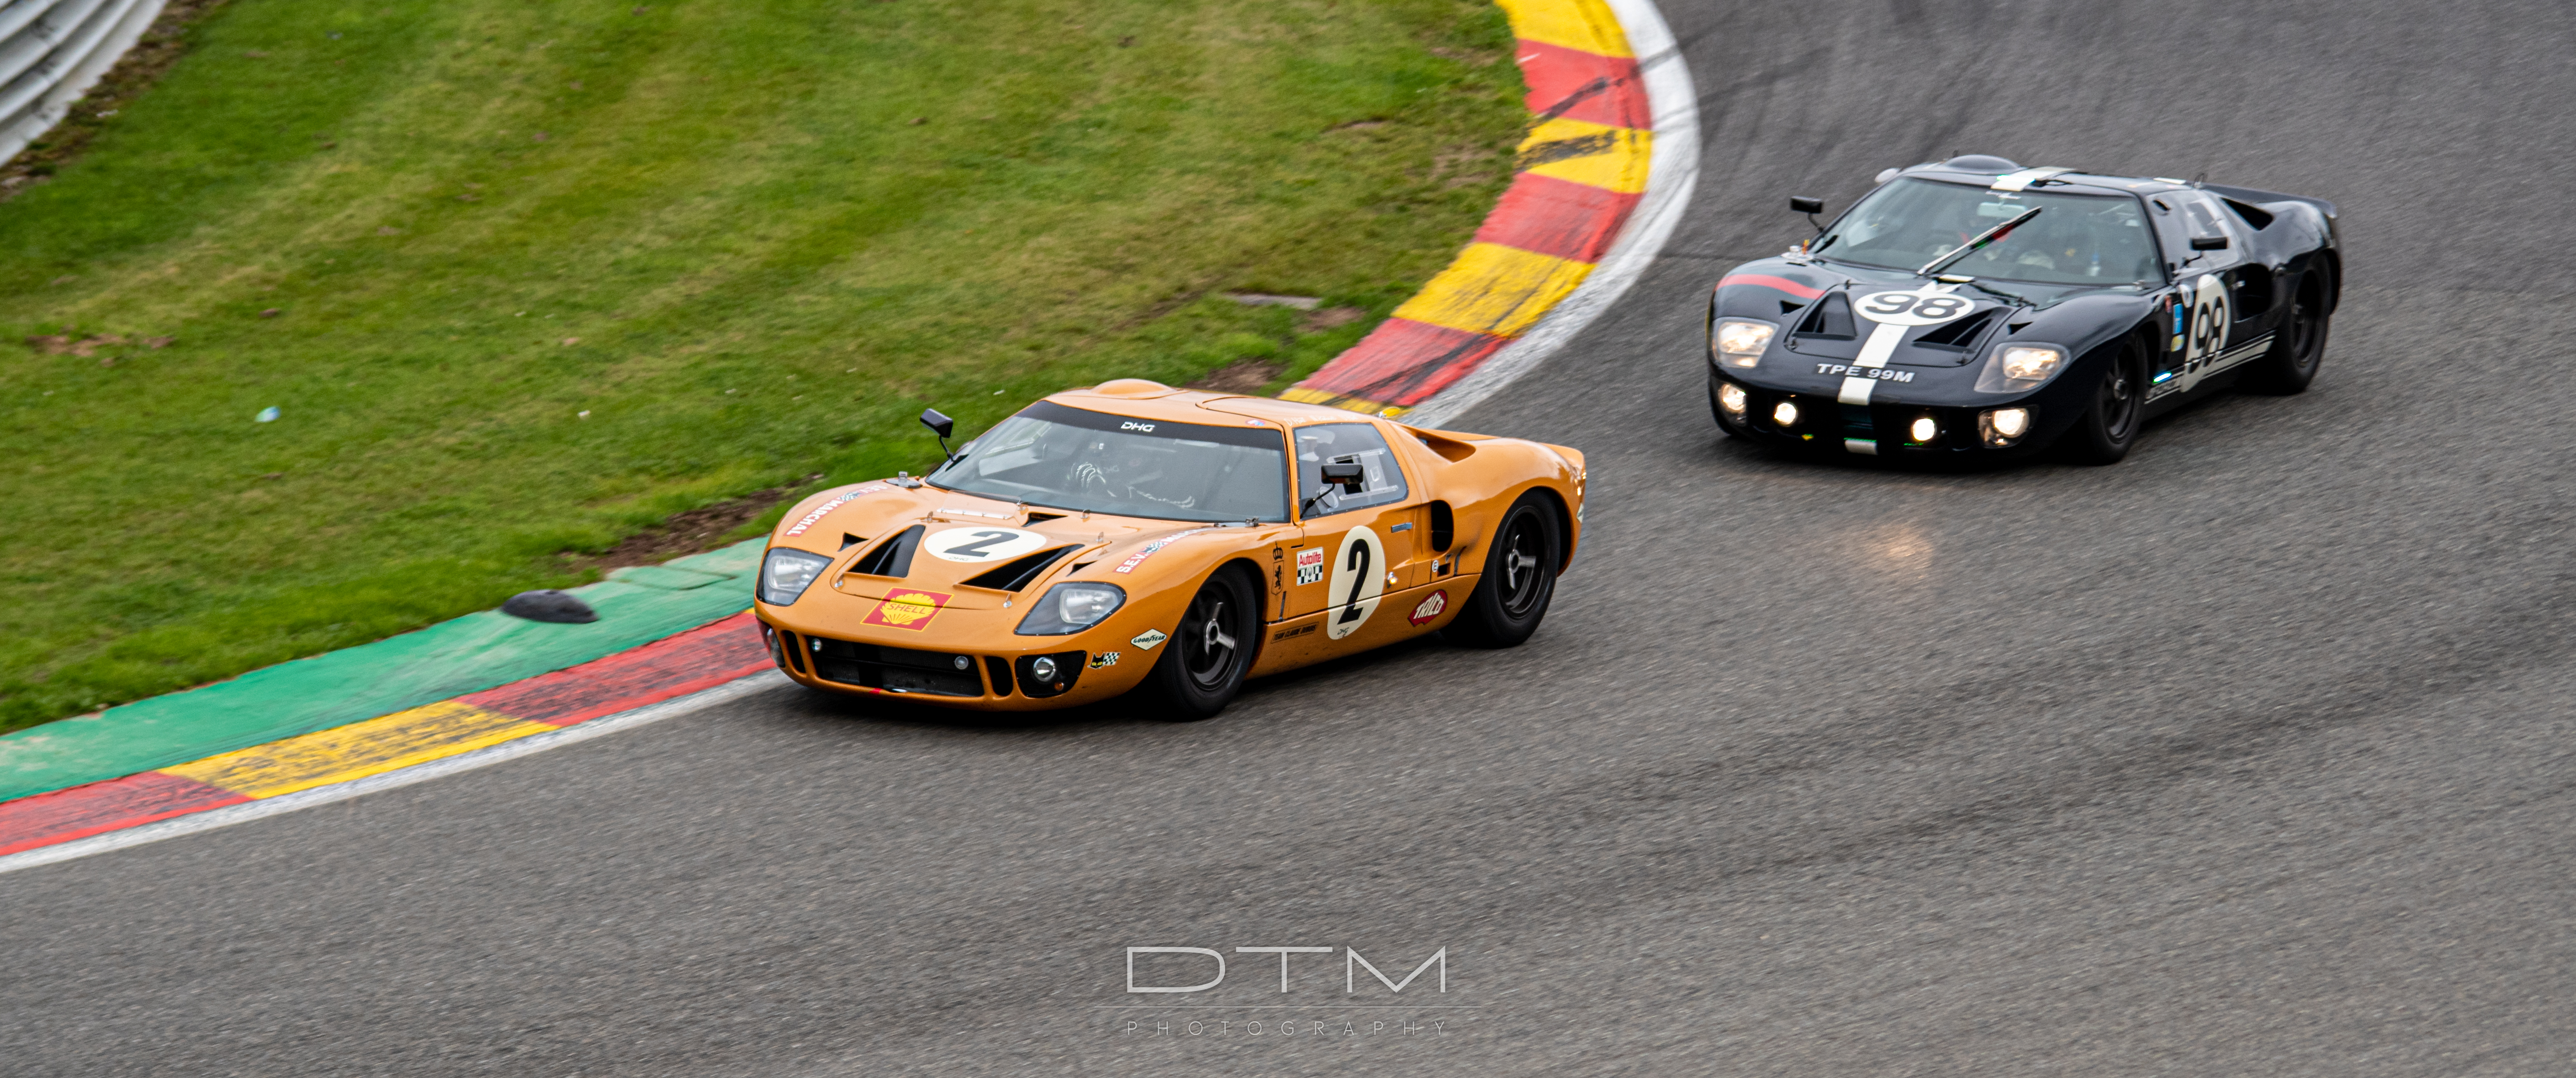 Ford GT40 Spa Francorchamps Spa Francorchamps Dtm Photography Race Cars Car Race Tracks Grass Front  5568x2331